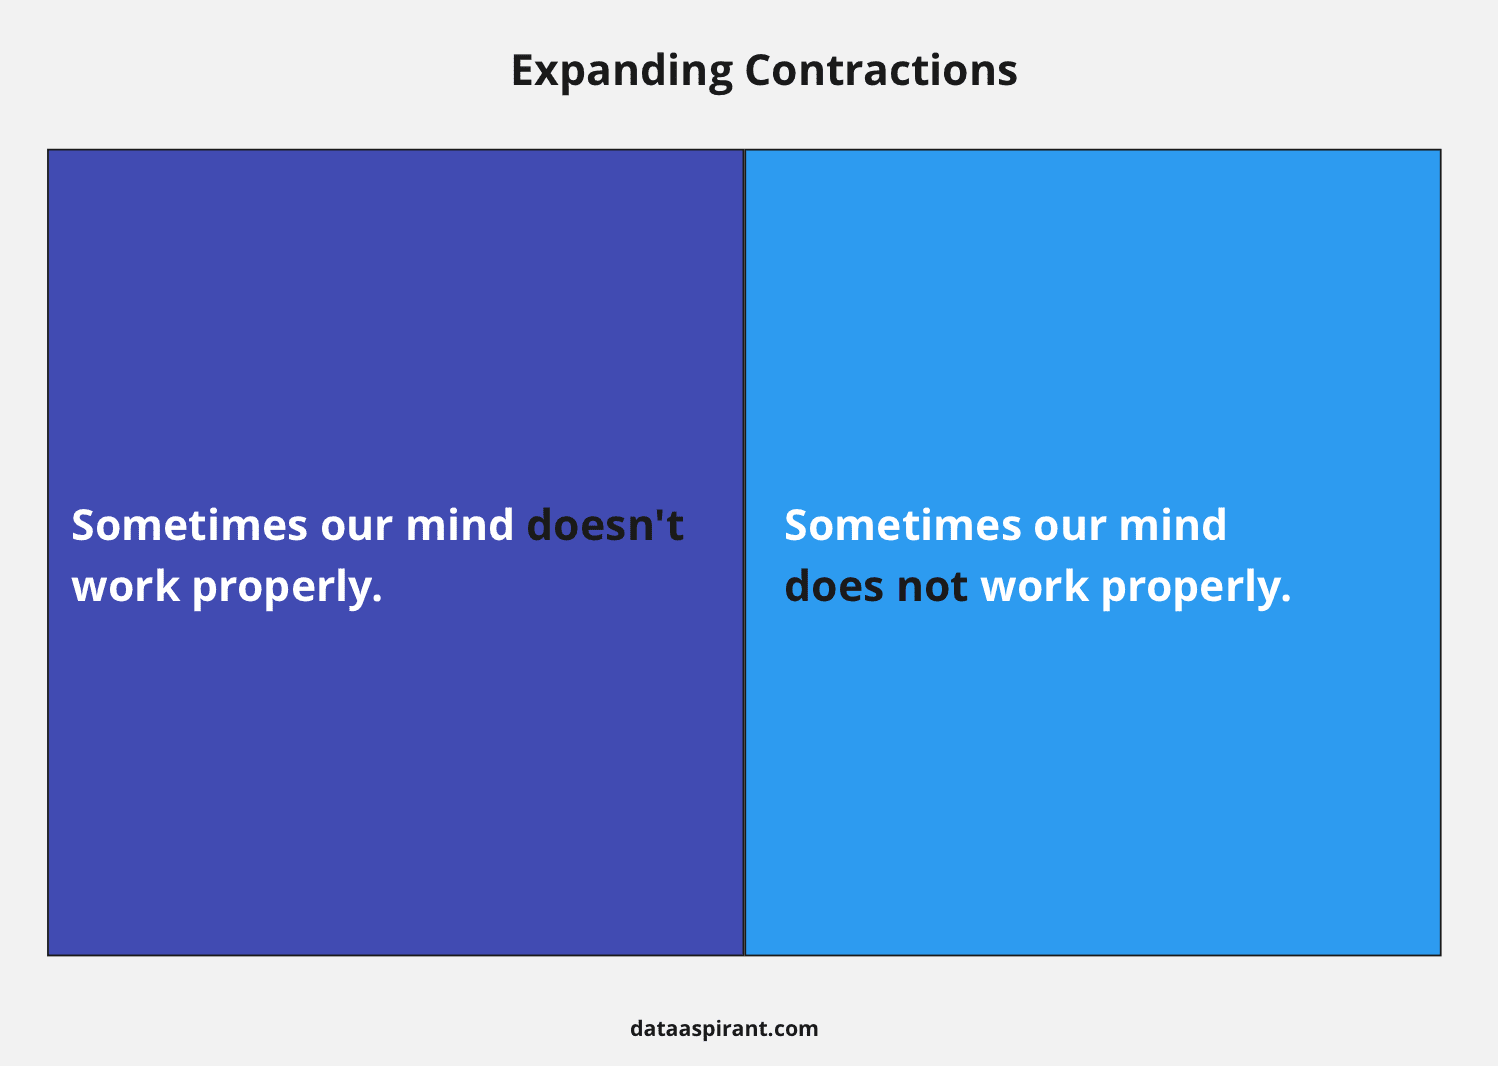 Expanding Contractions